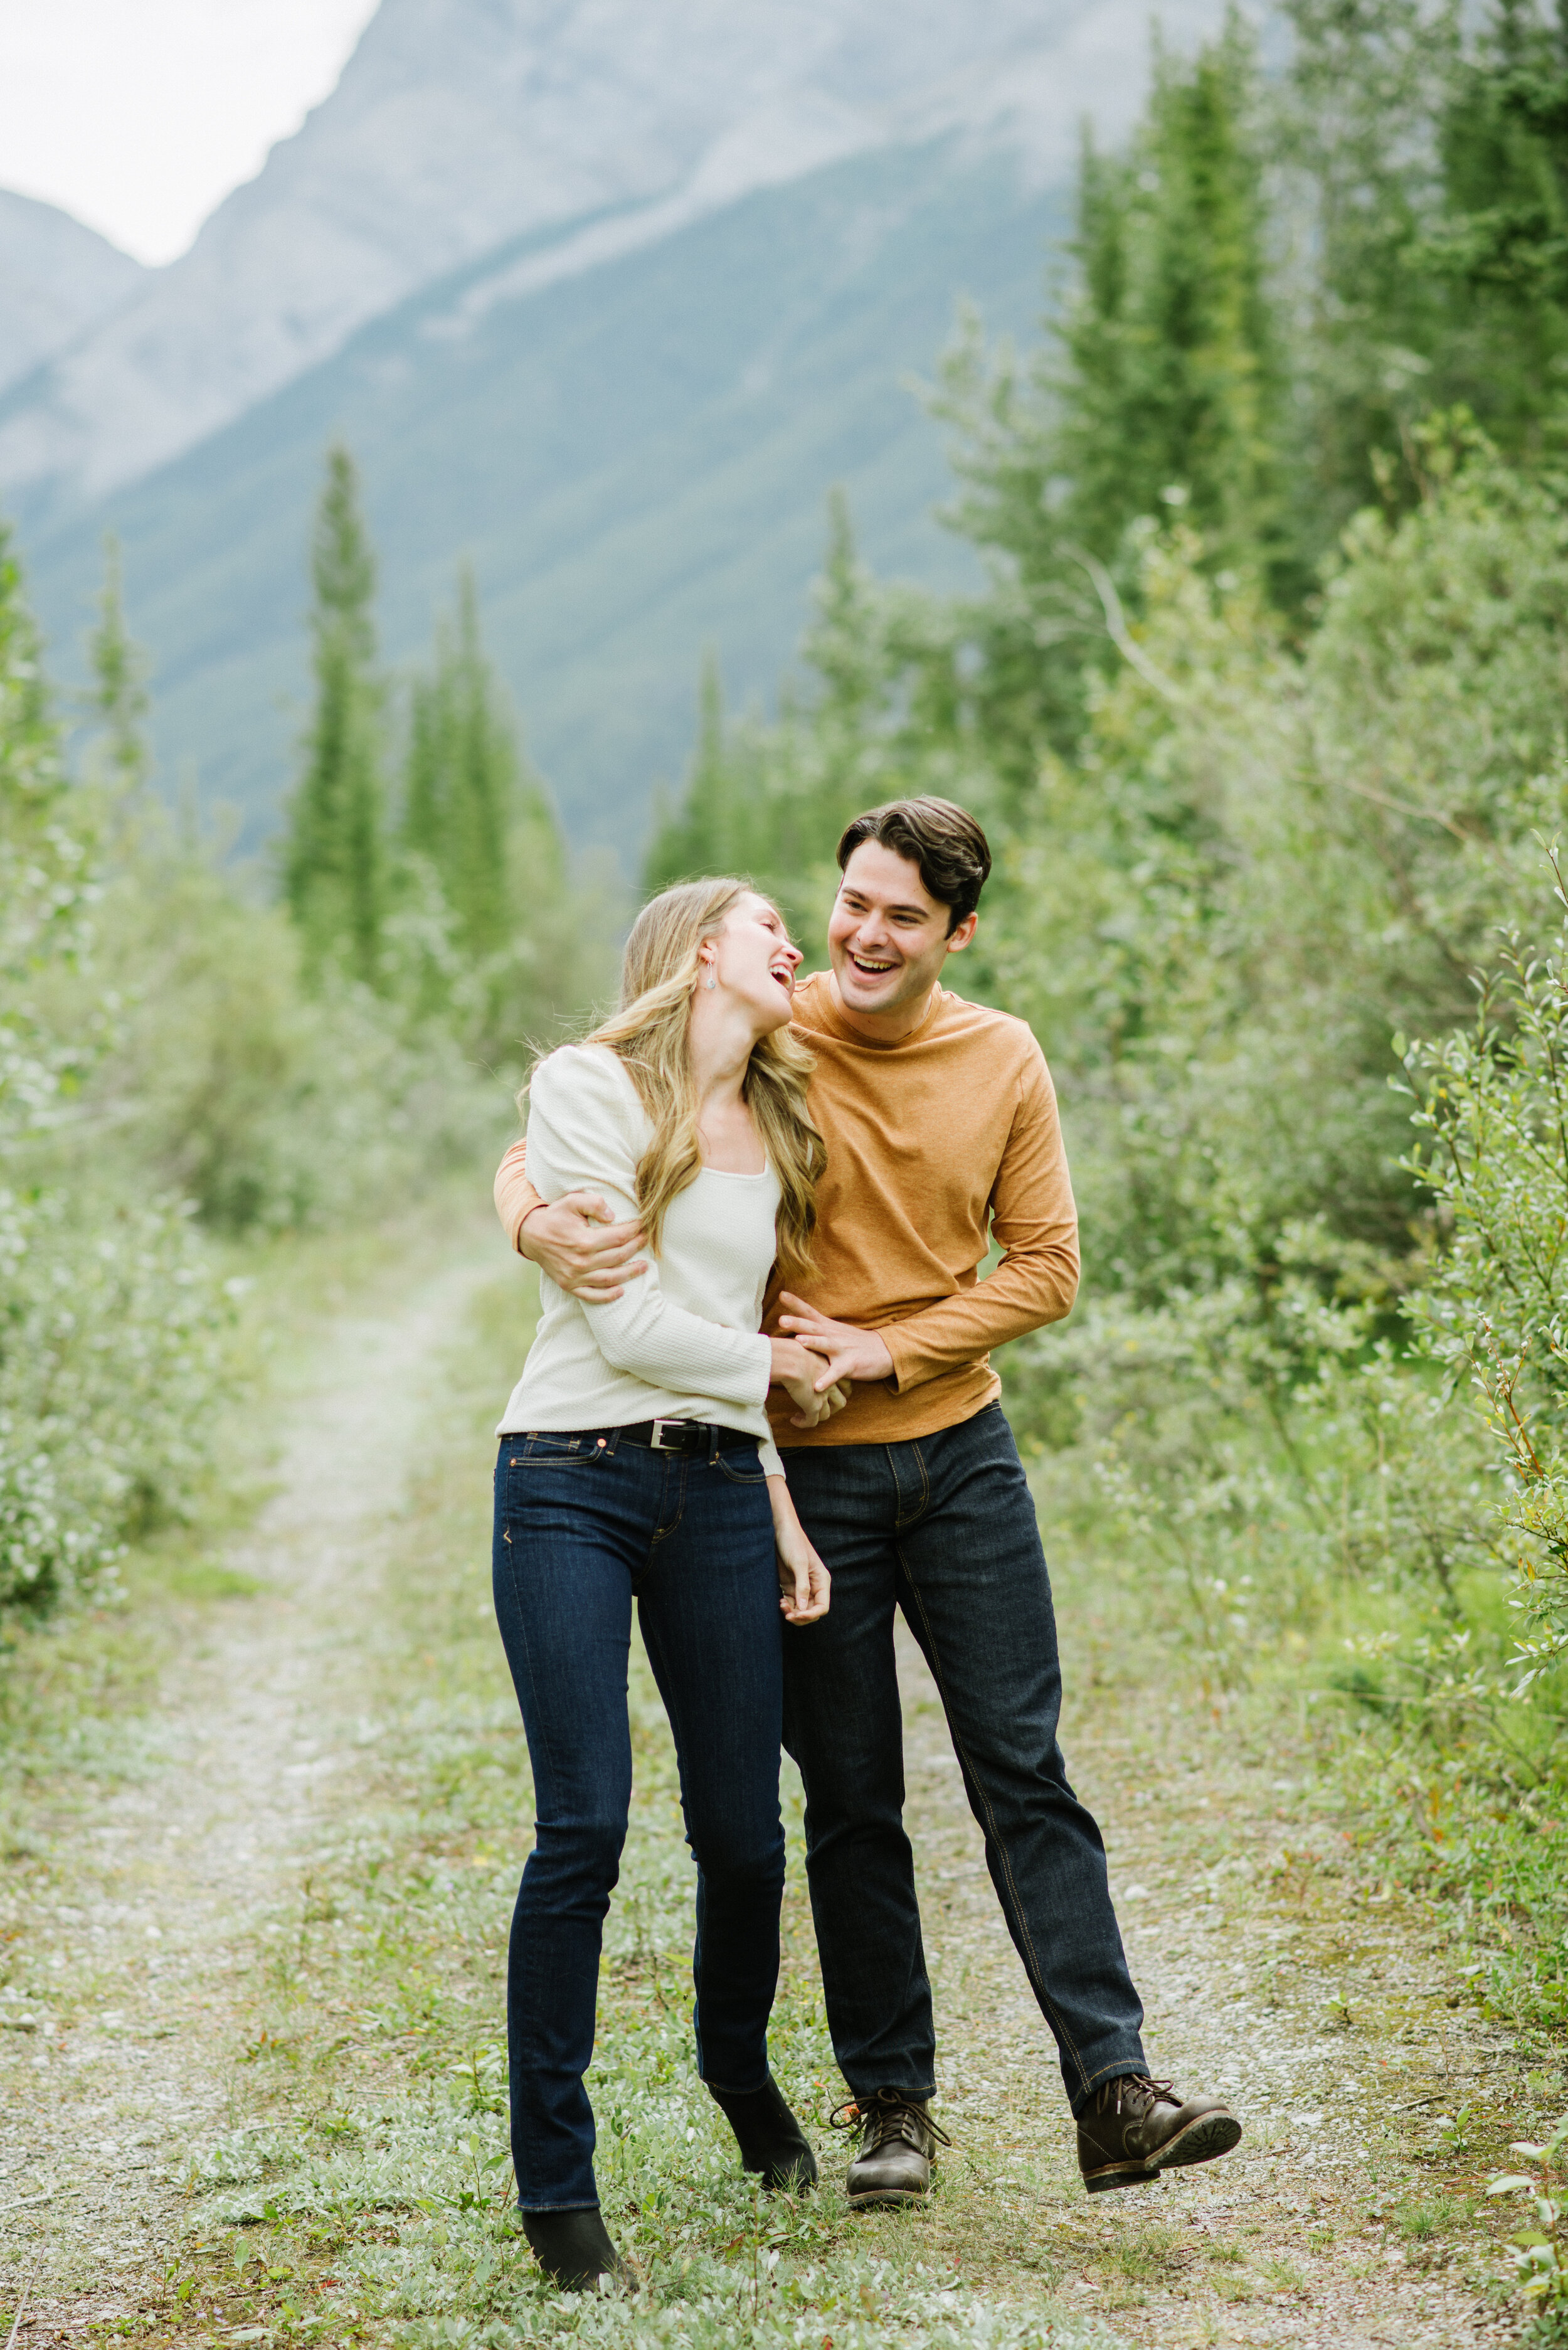 Becky_Sean_Canmore_Engagement_Photography_2021_CDSPhoto_HR_014.JPG